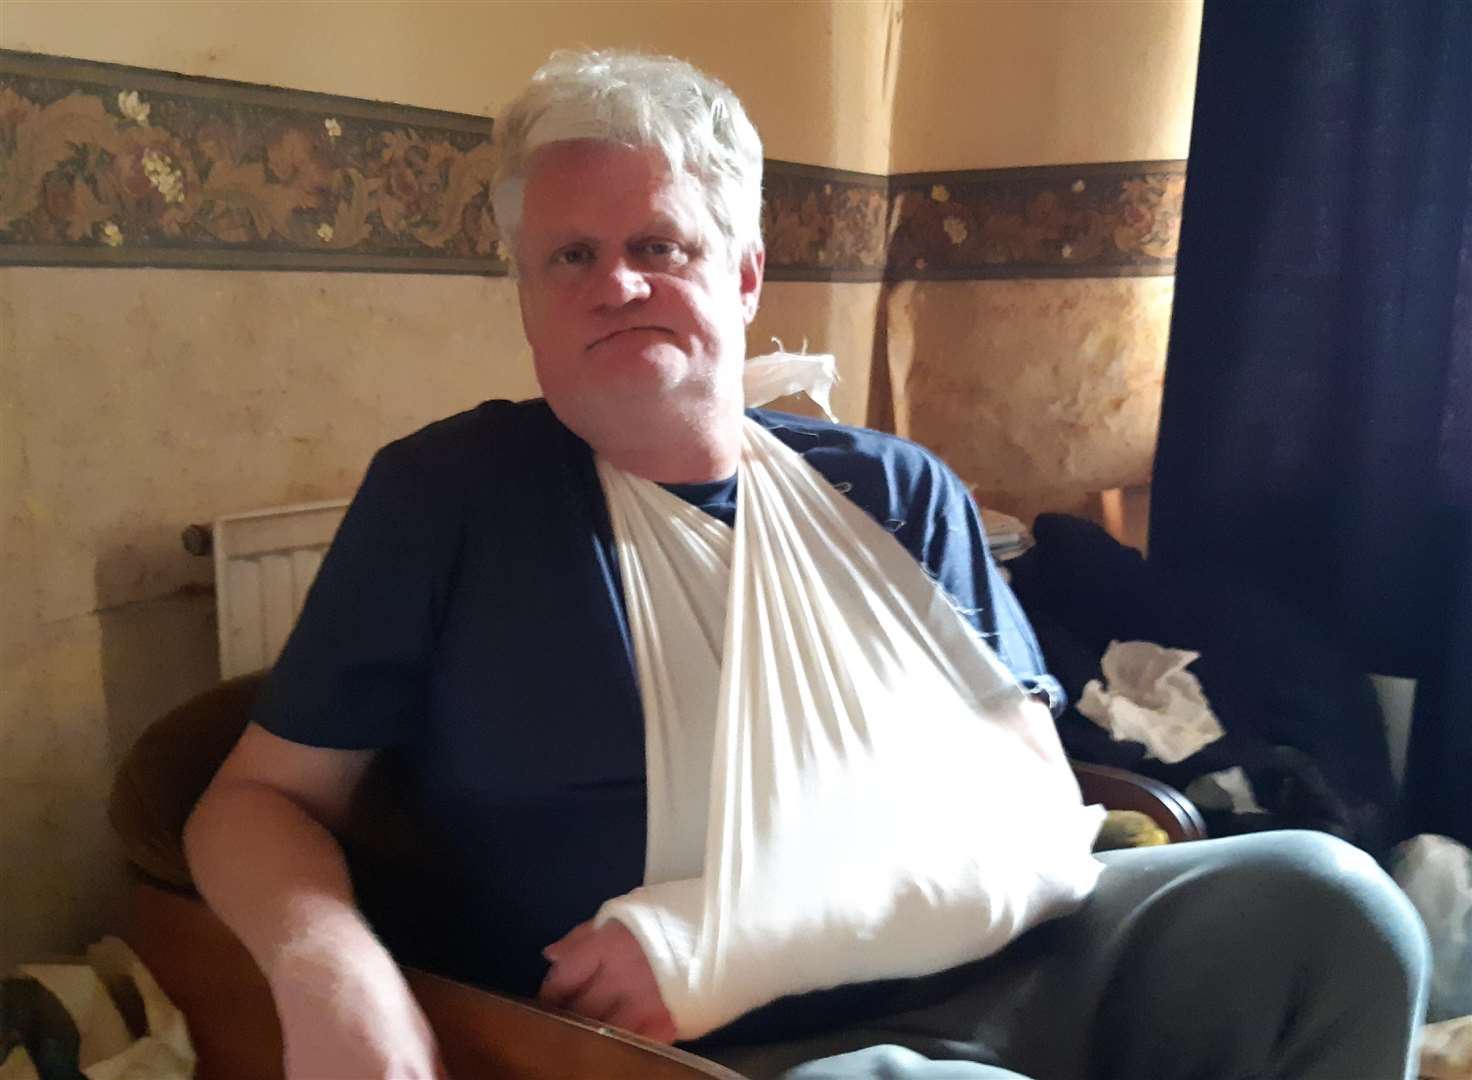 Dover reporter Sam Lennon's arm was broken after he was punched in the back of the head following an incident where police were called in Dover